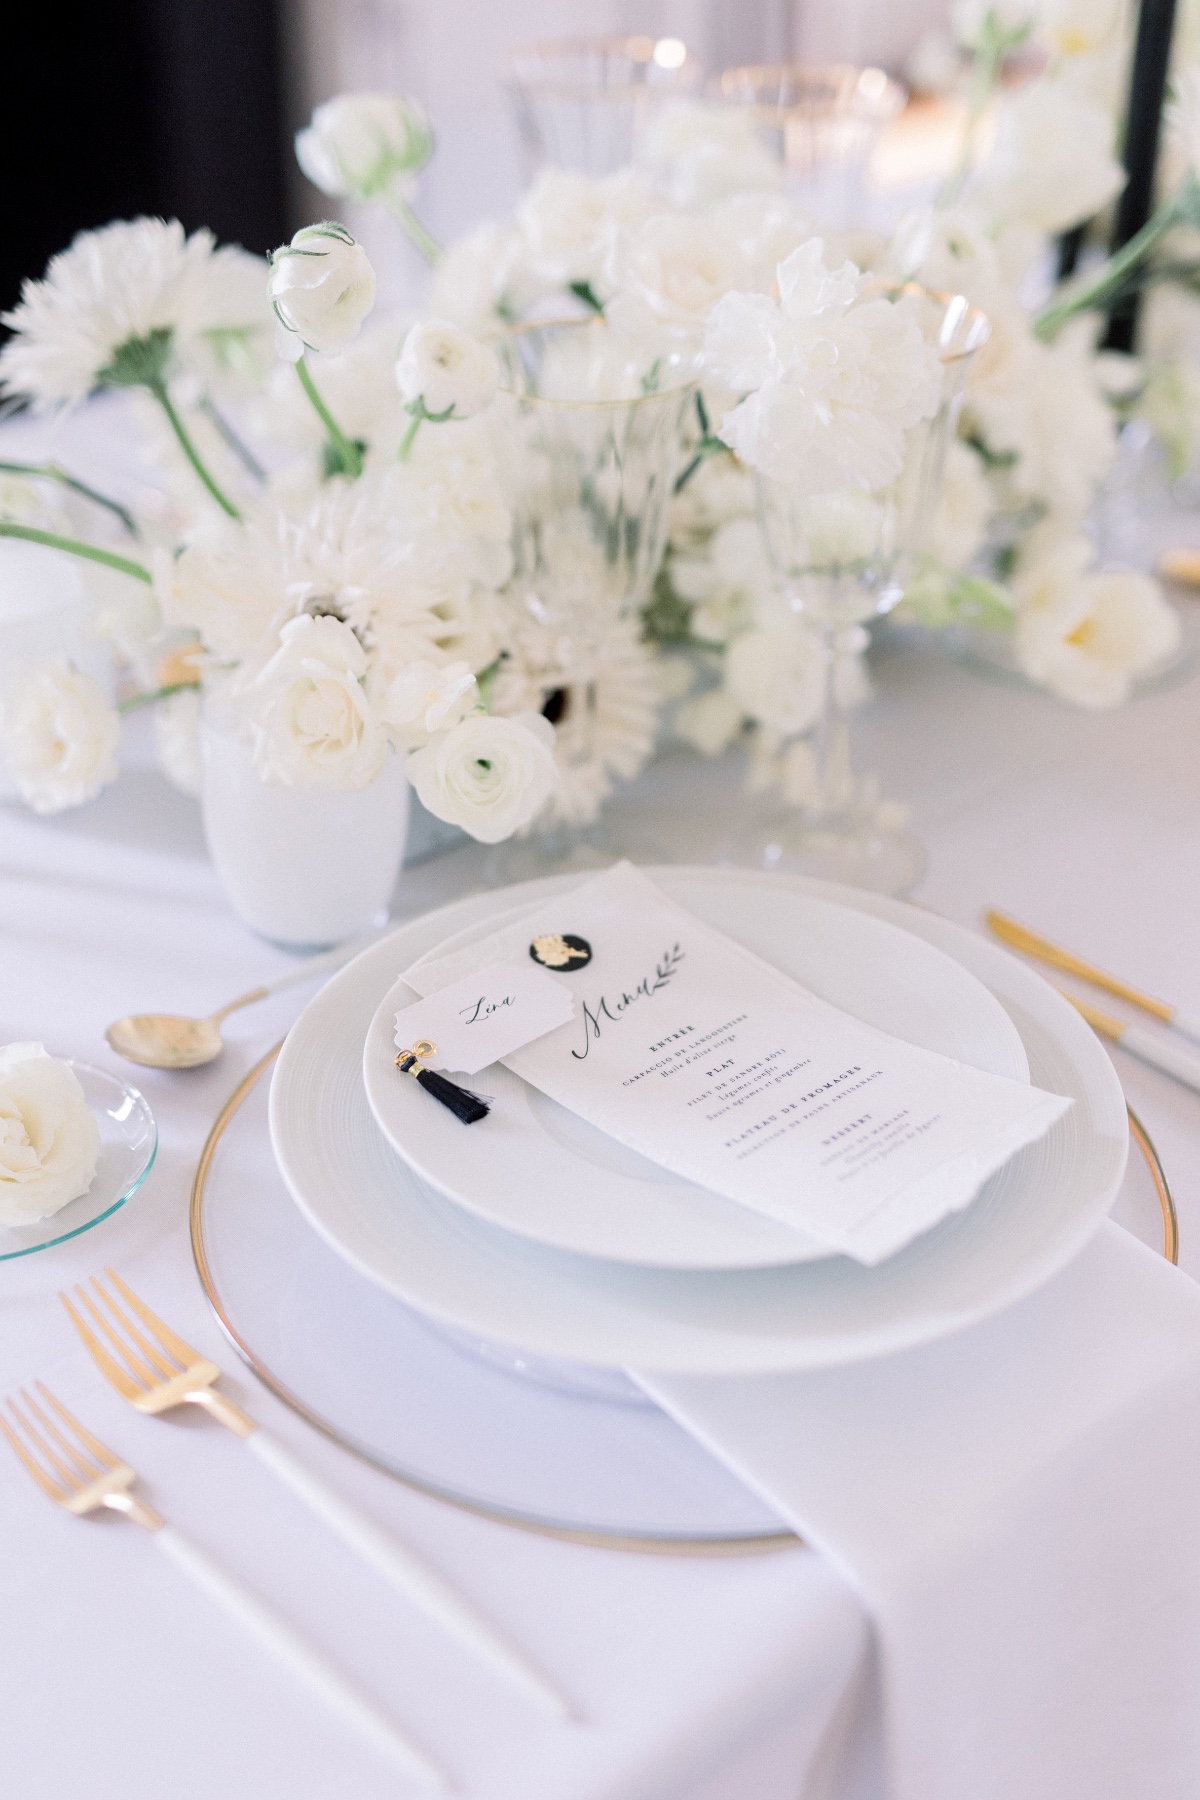 all white place setting for wedding